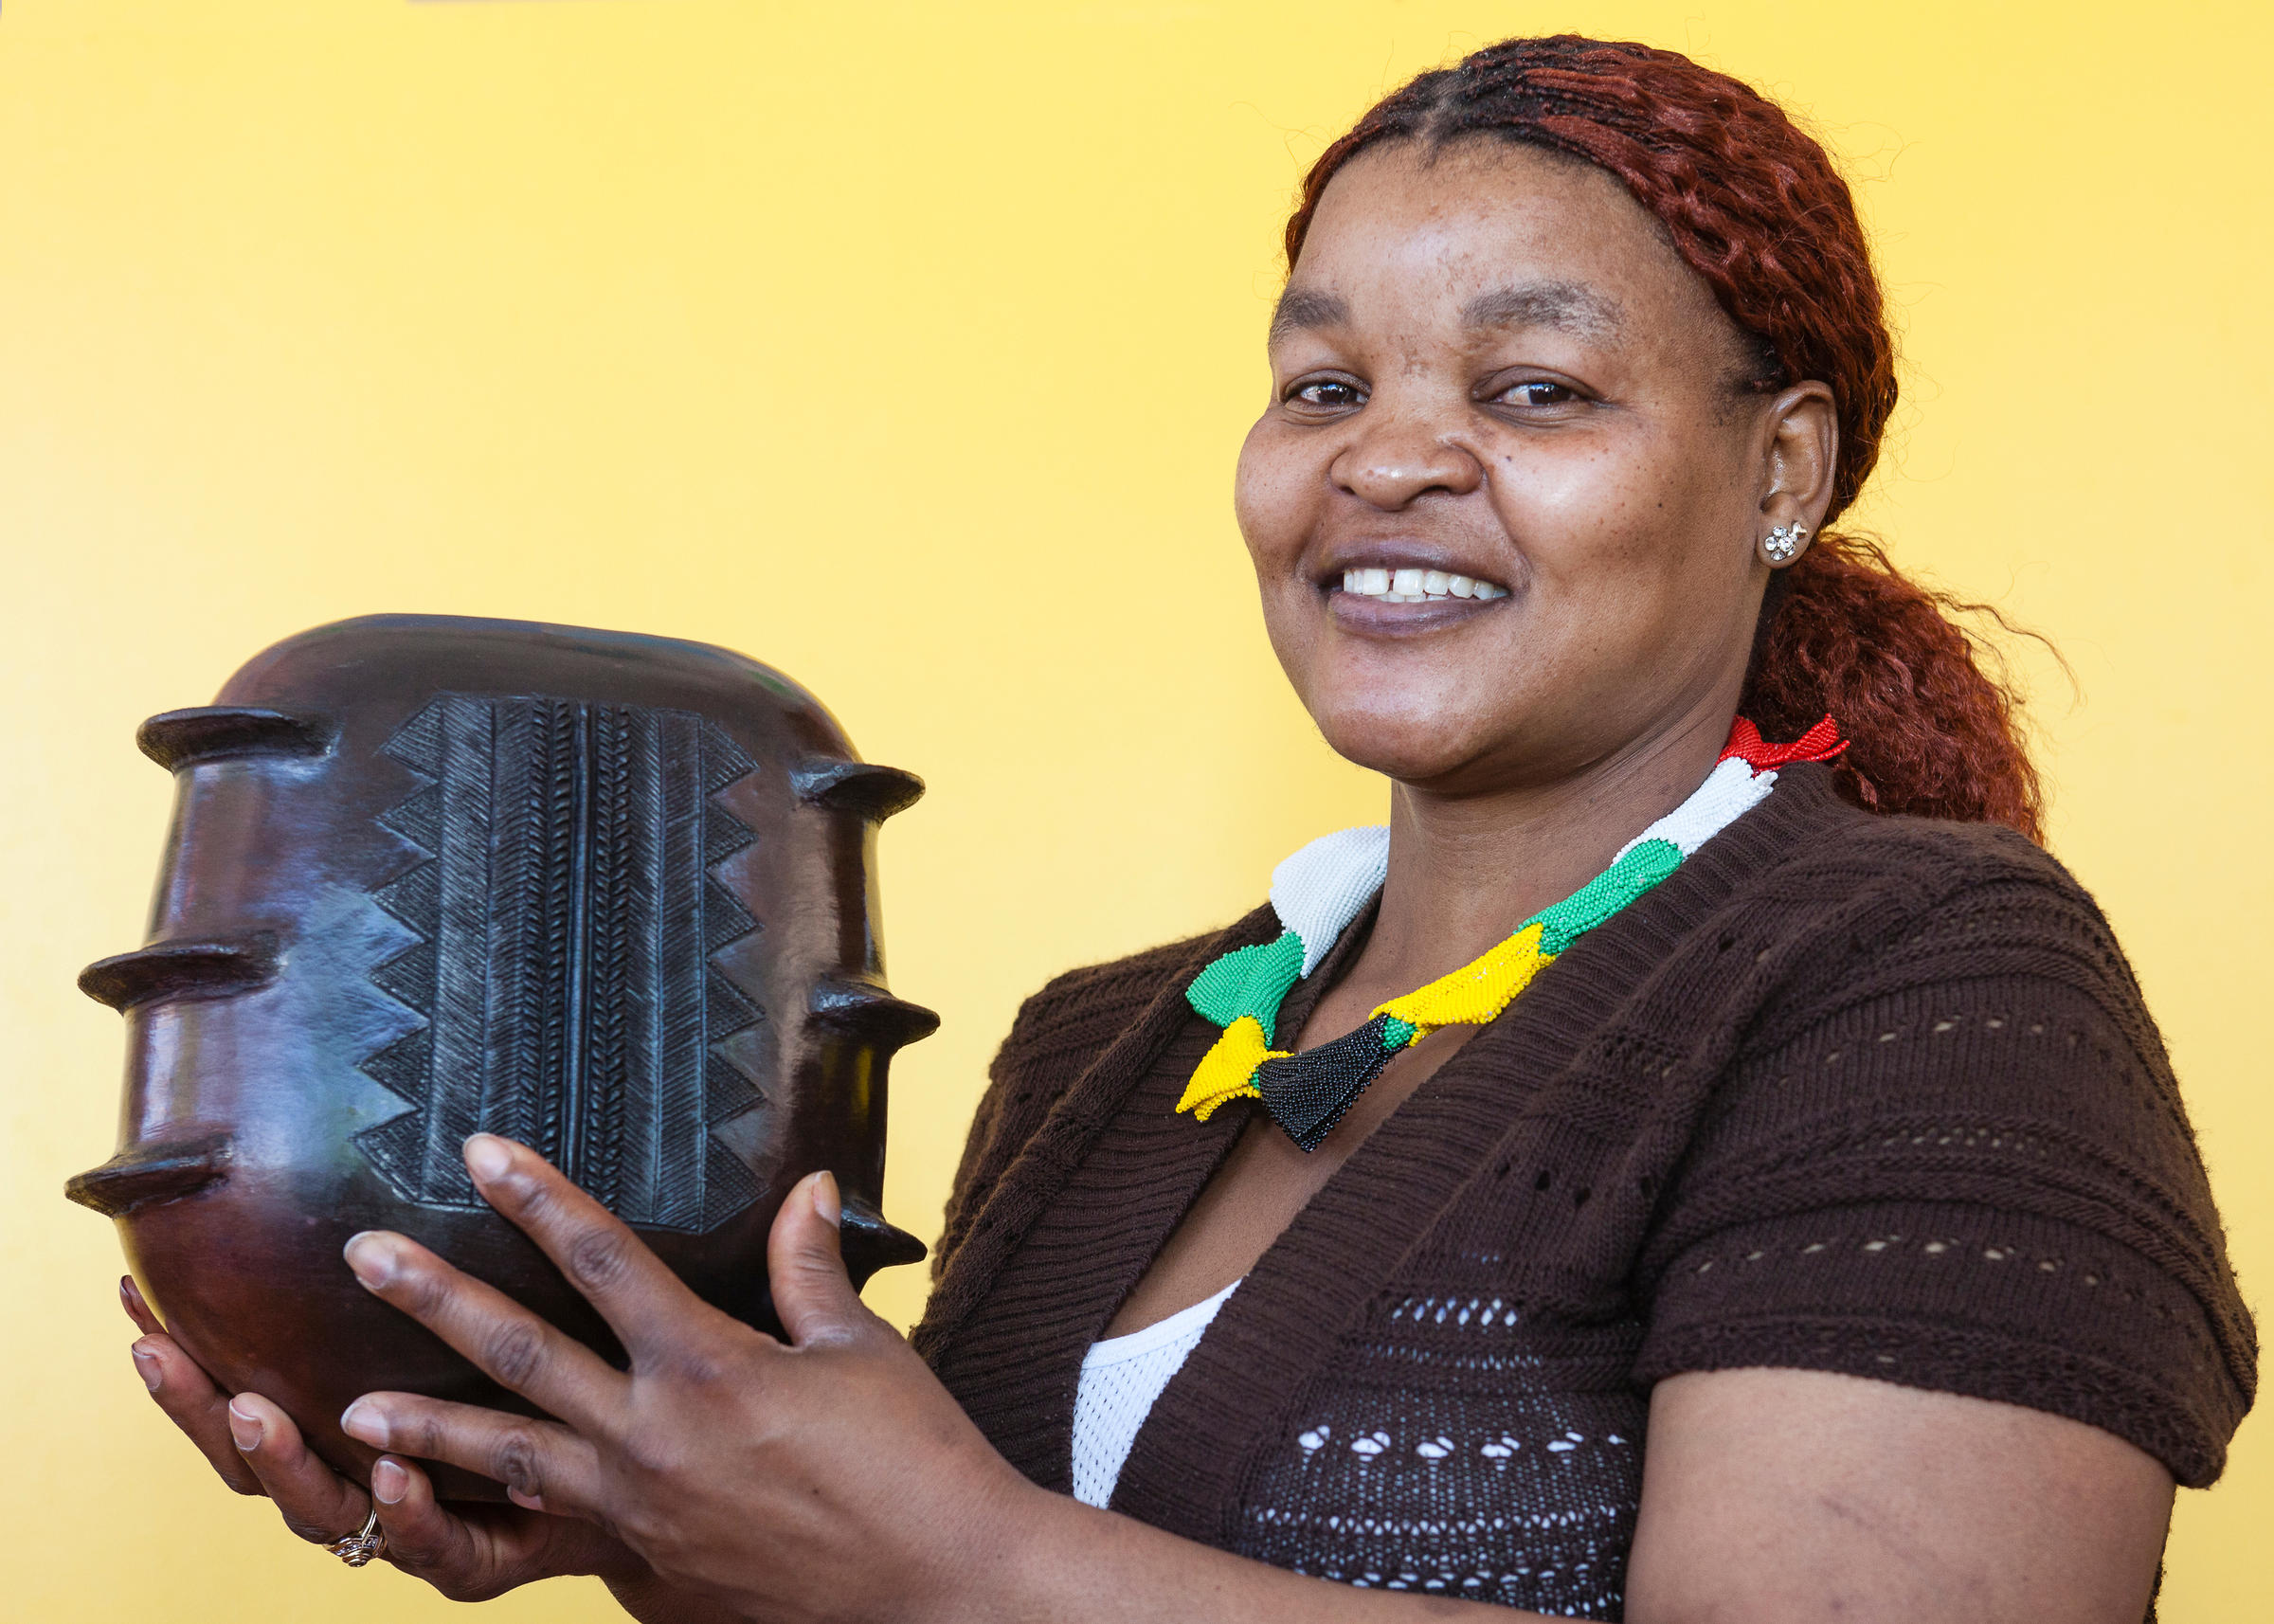 Artist Carries On Zulu Ceramics Tradition Of Her Forebears | KUNM